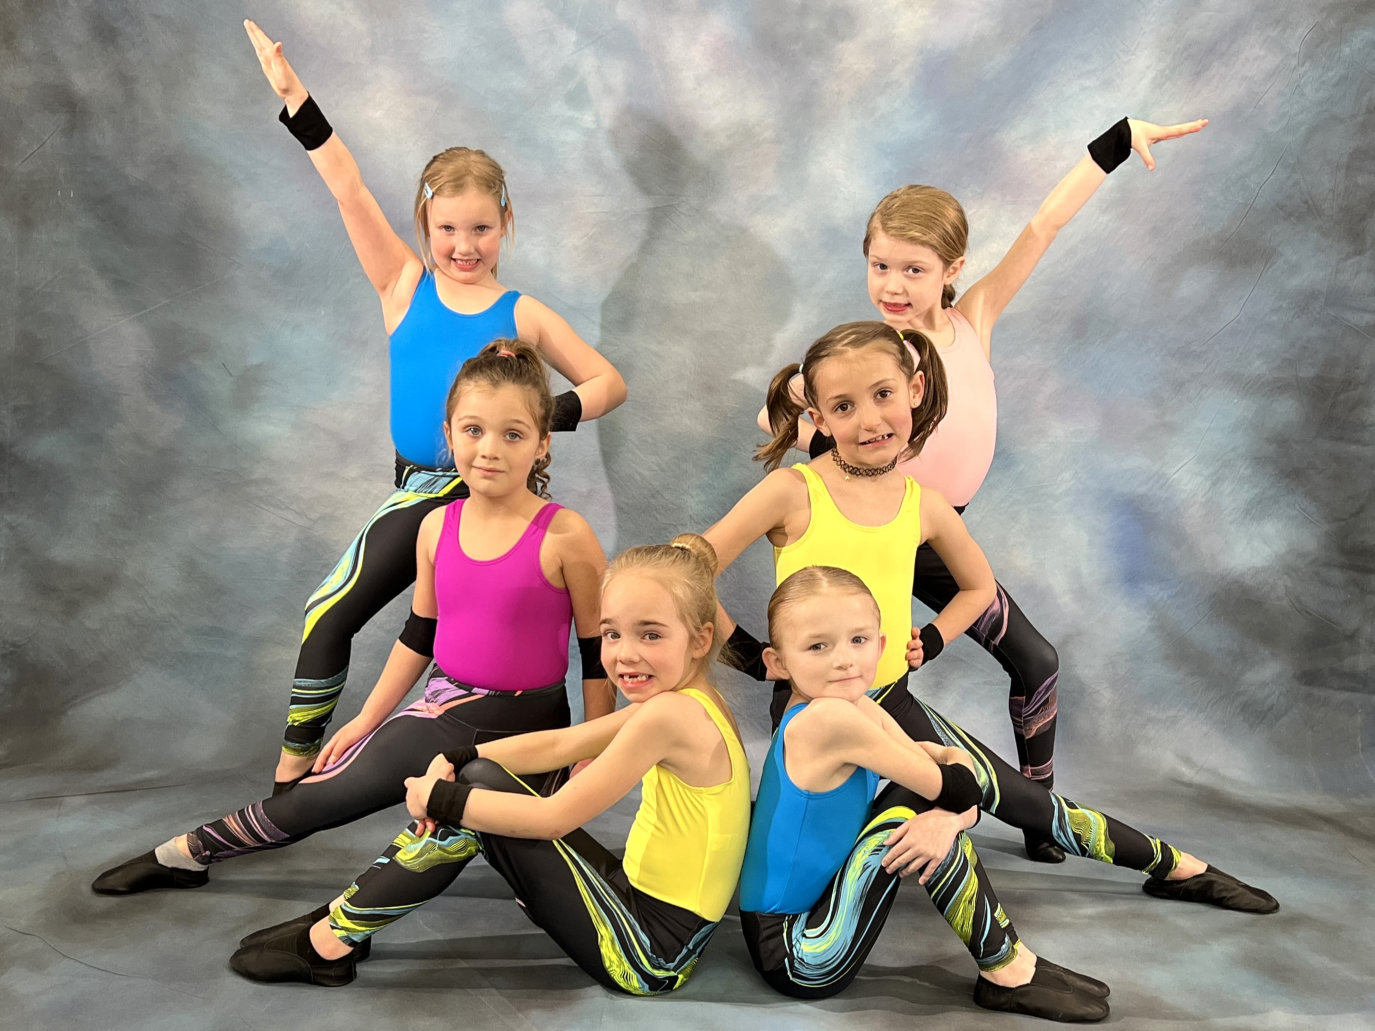 Girl is colorful acro outfits group portrait